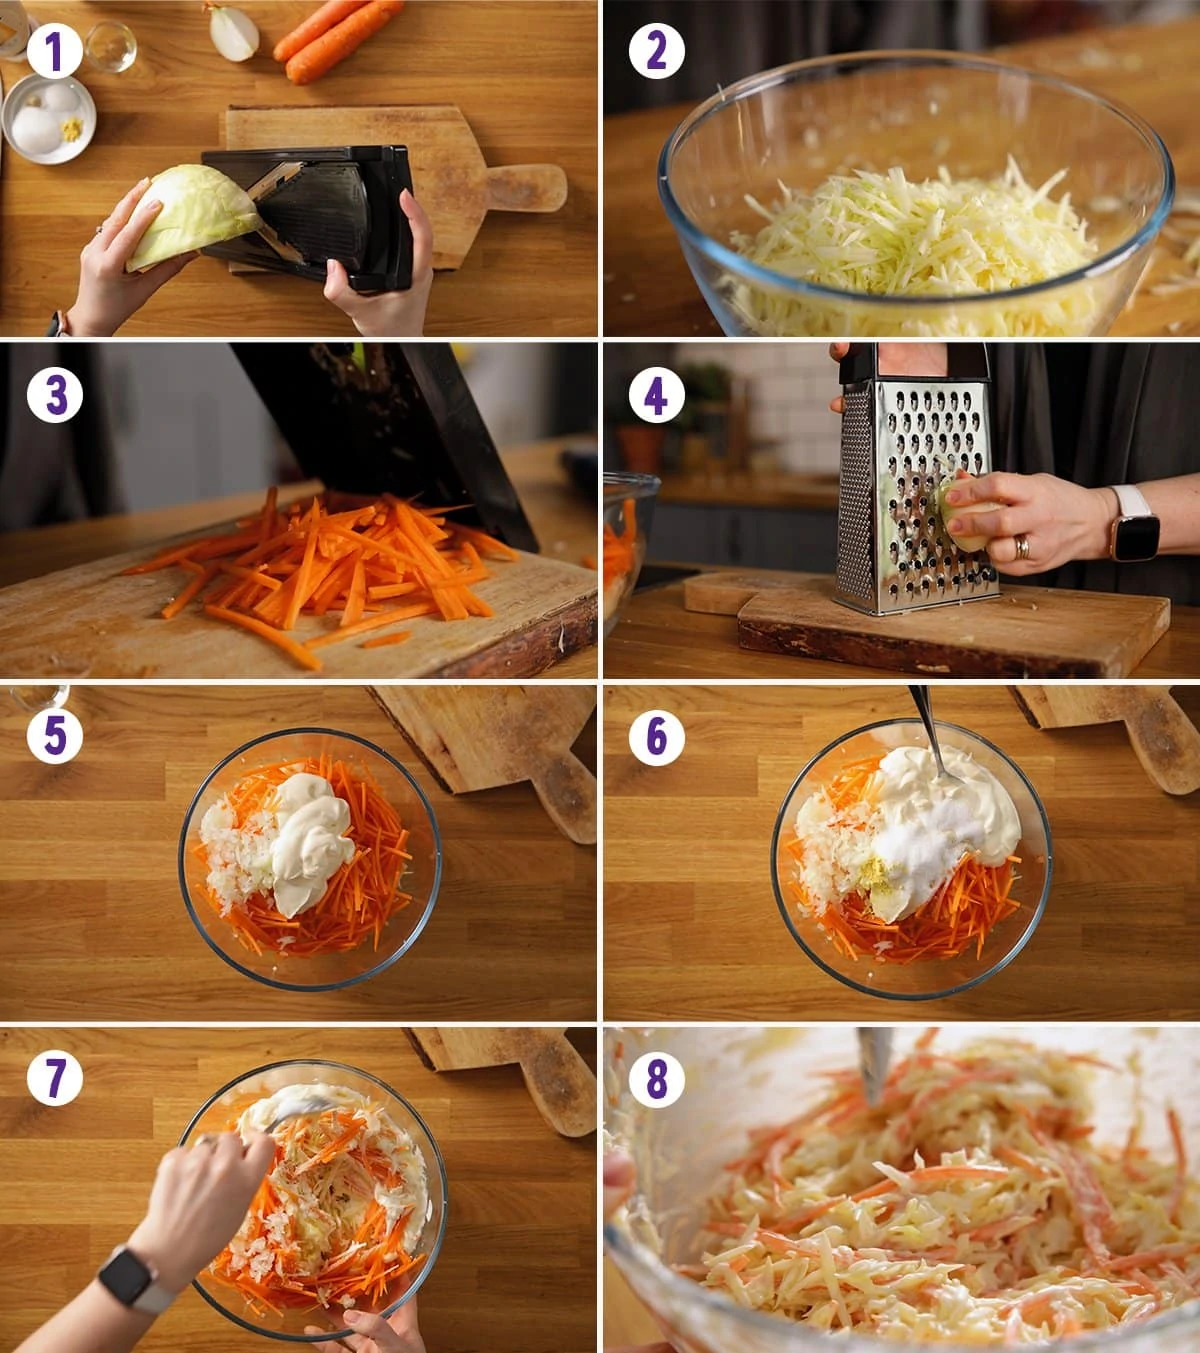 8 image collage showing how to make creamy coleslaw